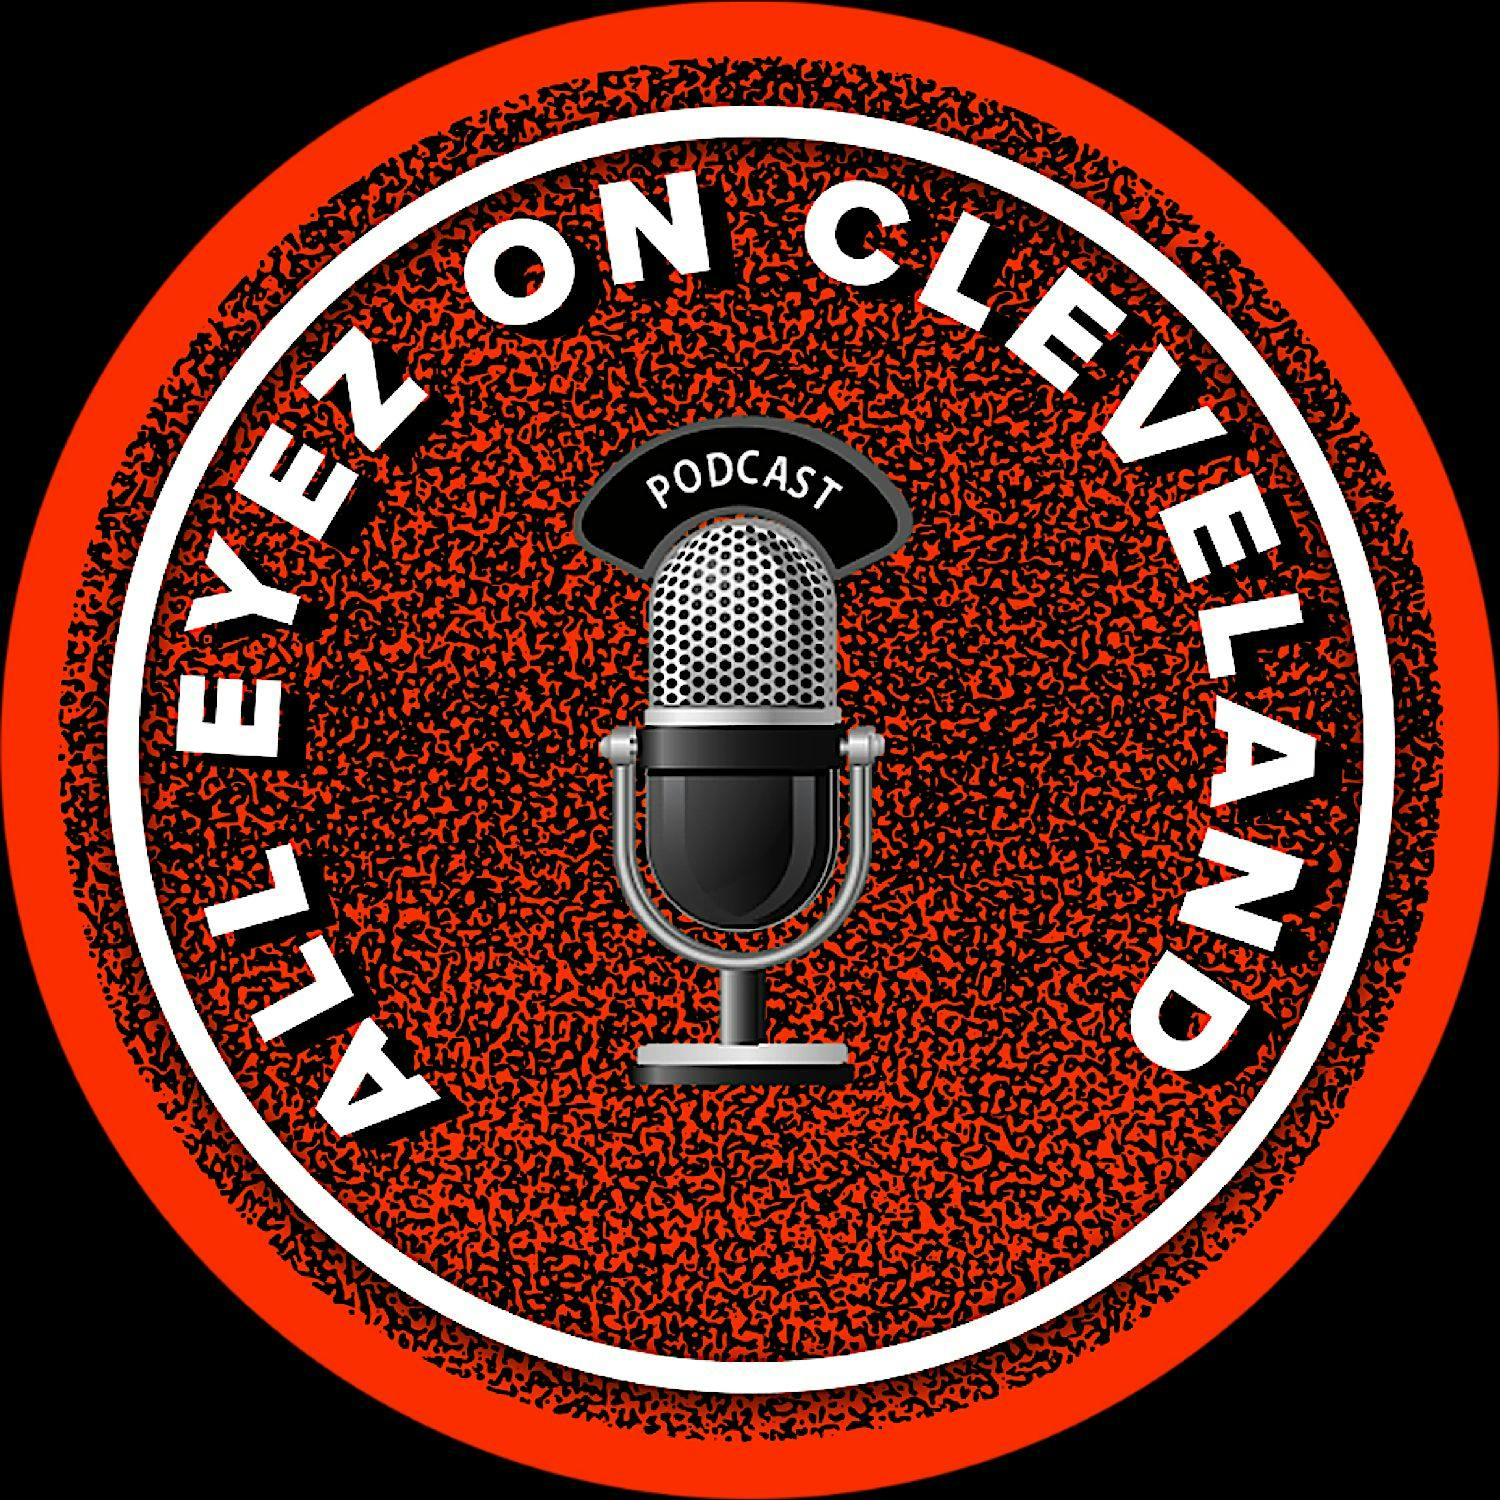 All Eyez on Cleveland with Ken Carman of 92 3 The Fan